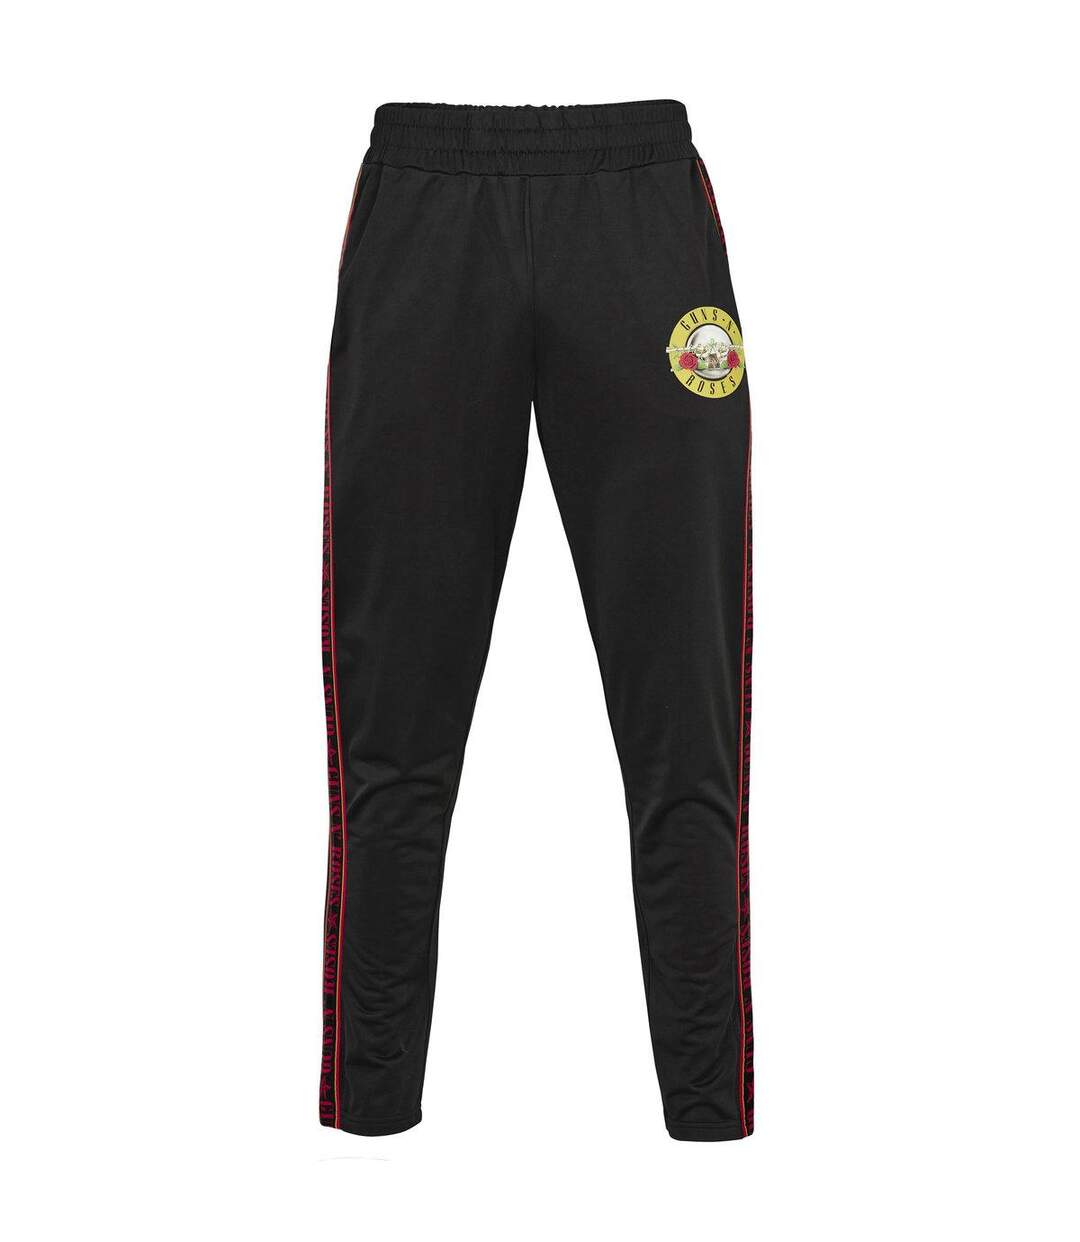 Amplified Mens Tricot Guns N Roses Tracksuit Bottoms (Black)